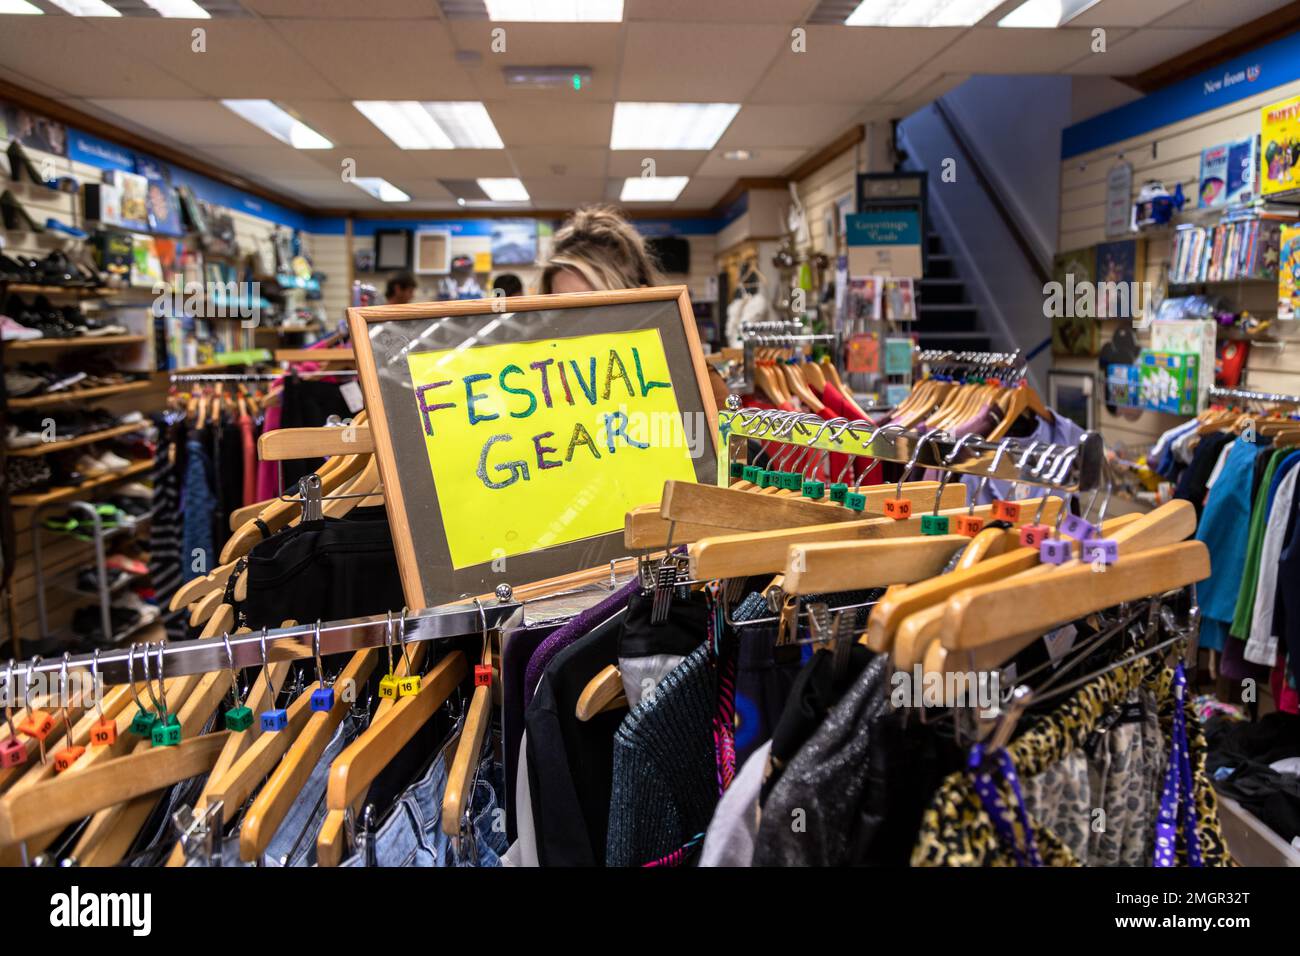 Festival clothes or gear for sale in a charity shop, Bristol, UK Stock Photo